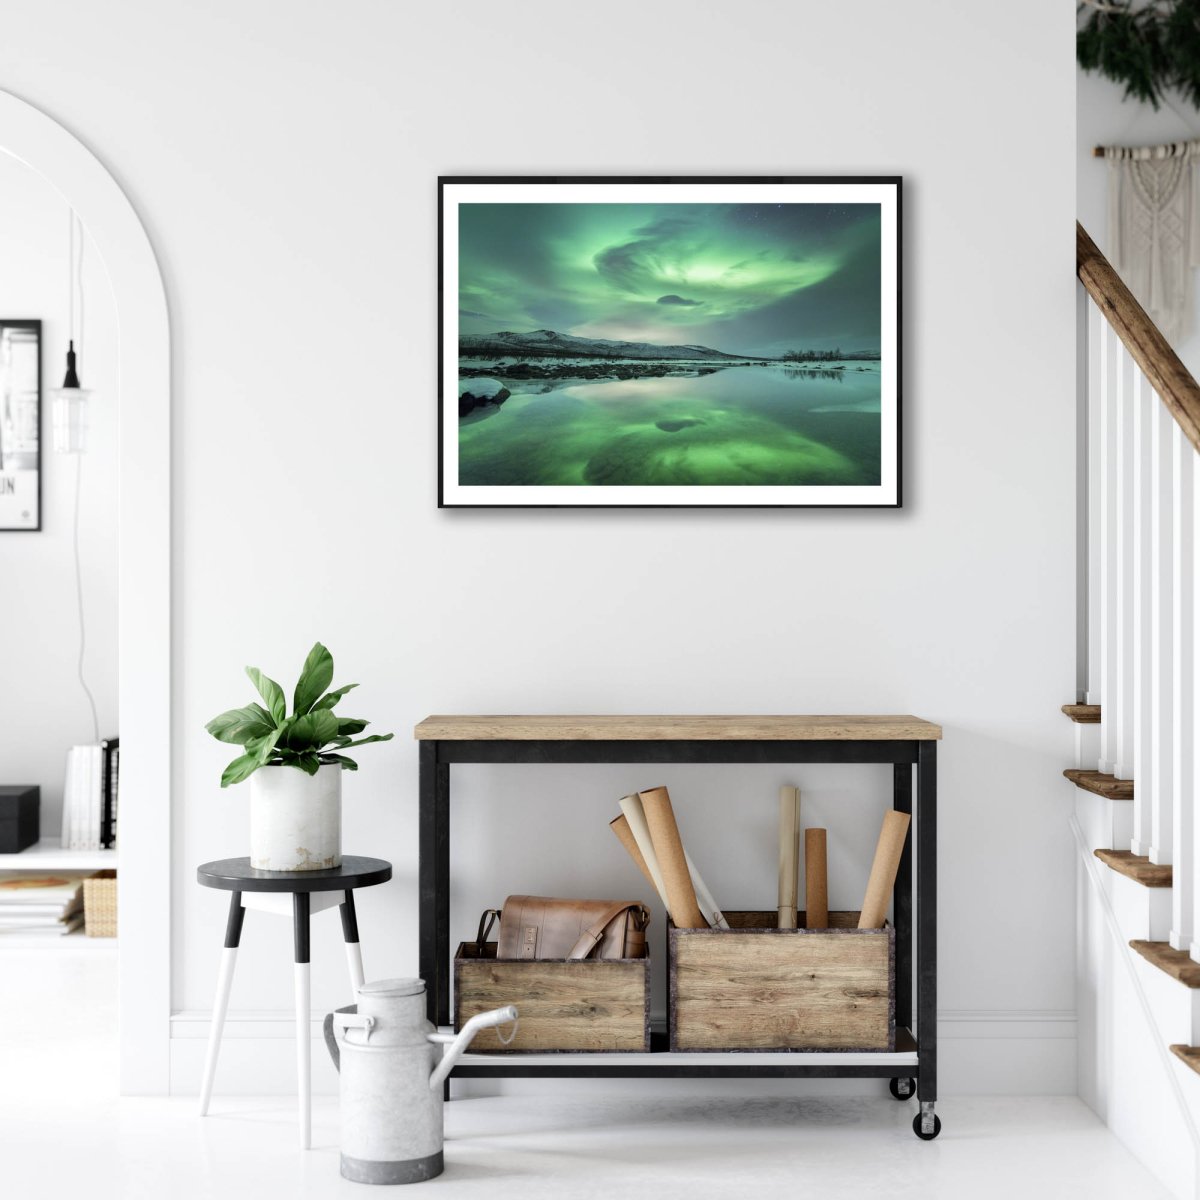 Fine art print of Northern Lights and mountains reflecting in lake, on white wall above desk.